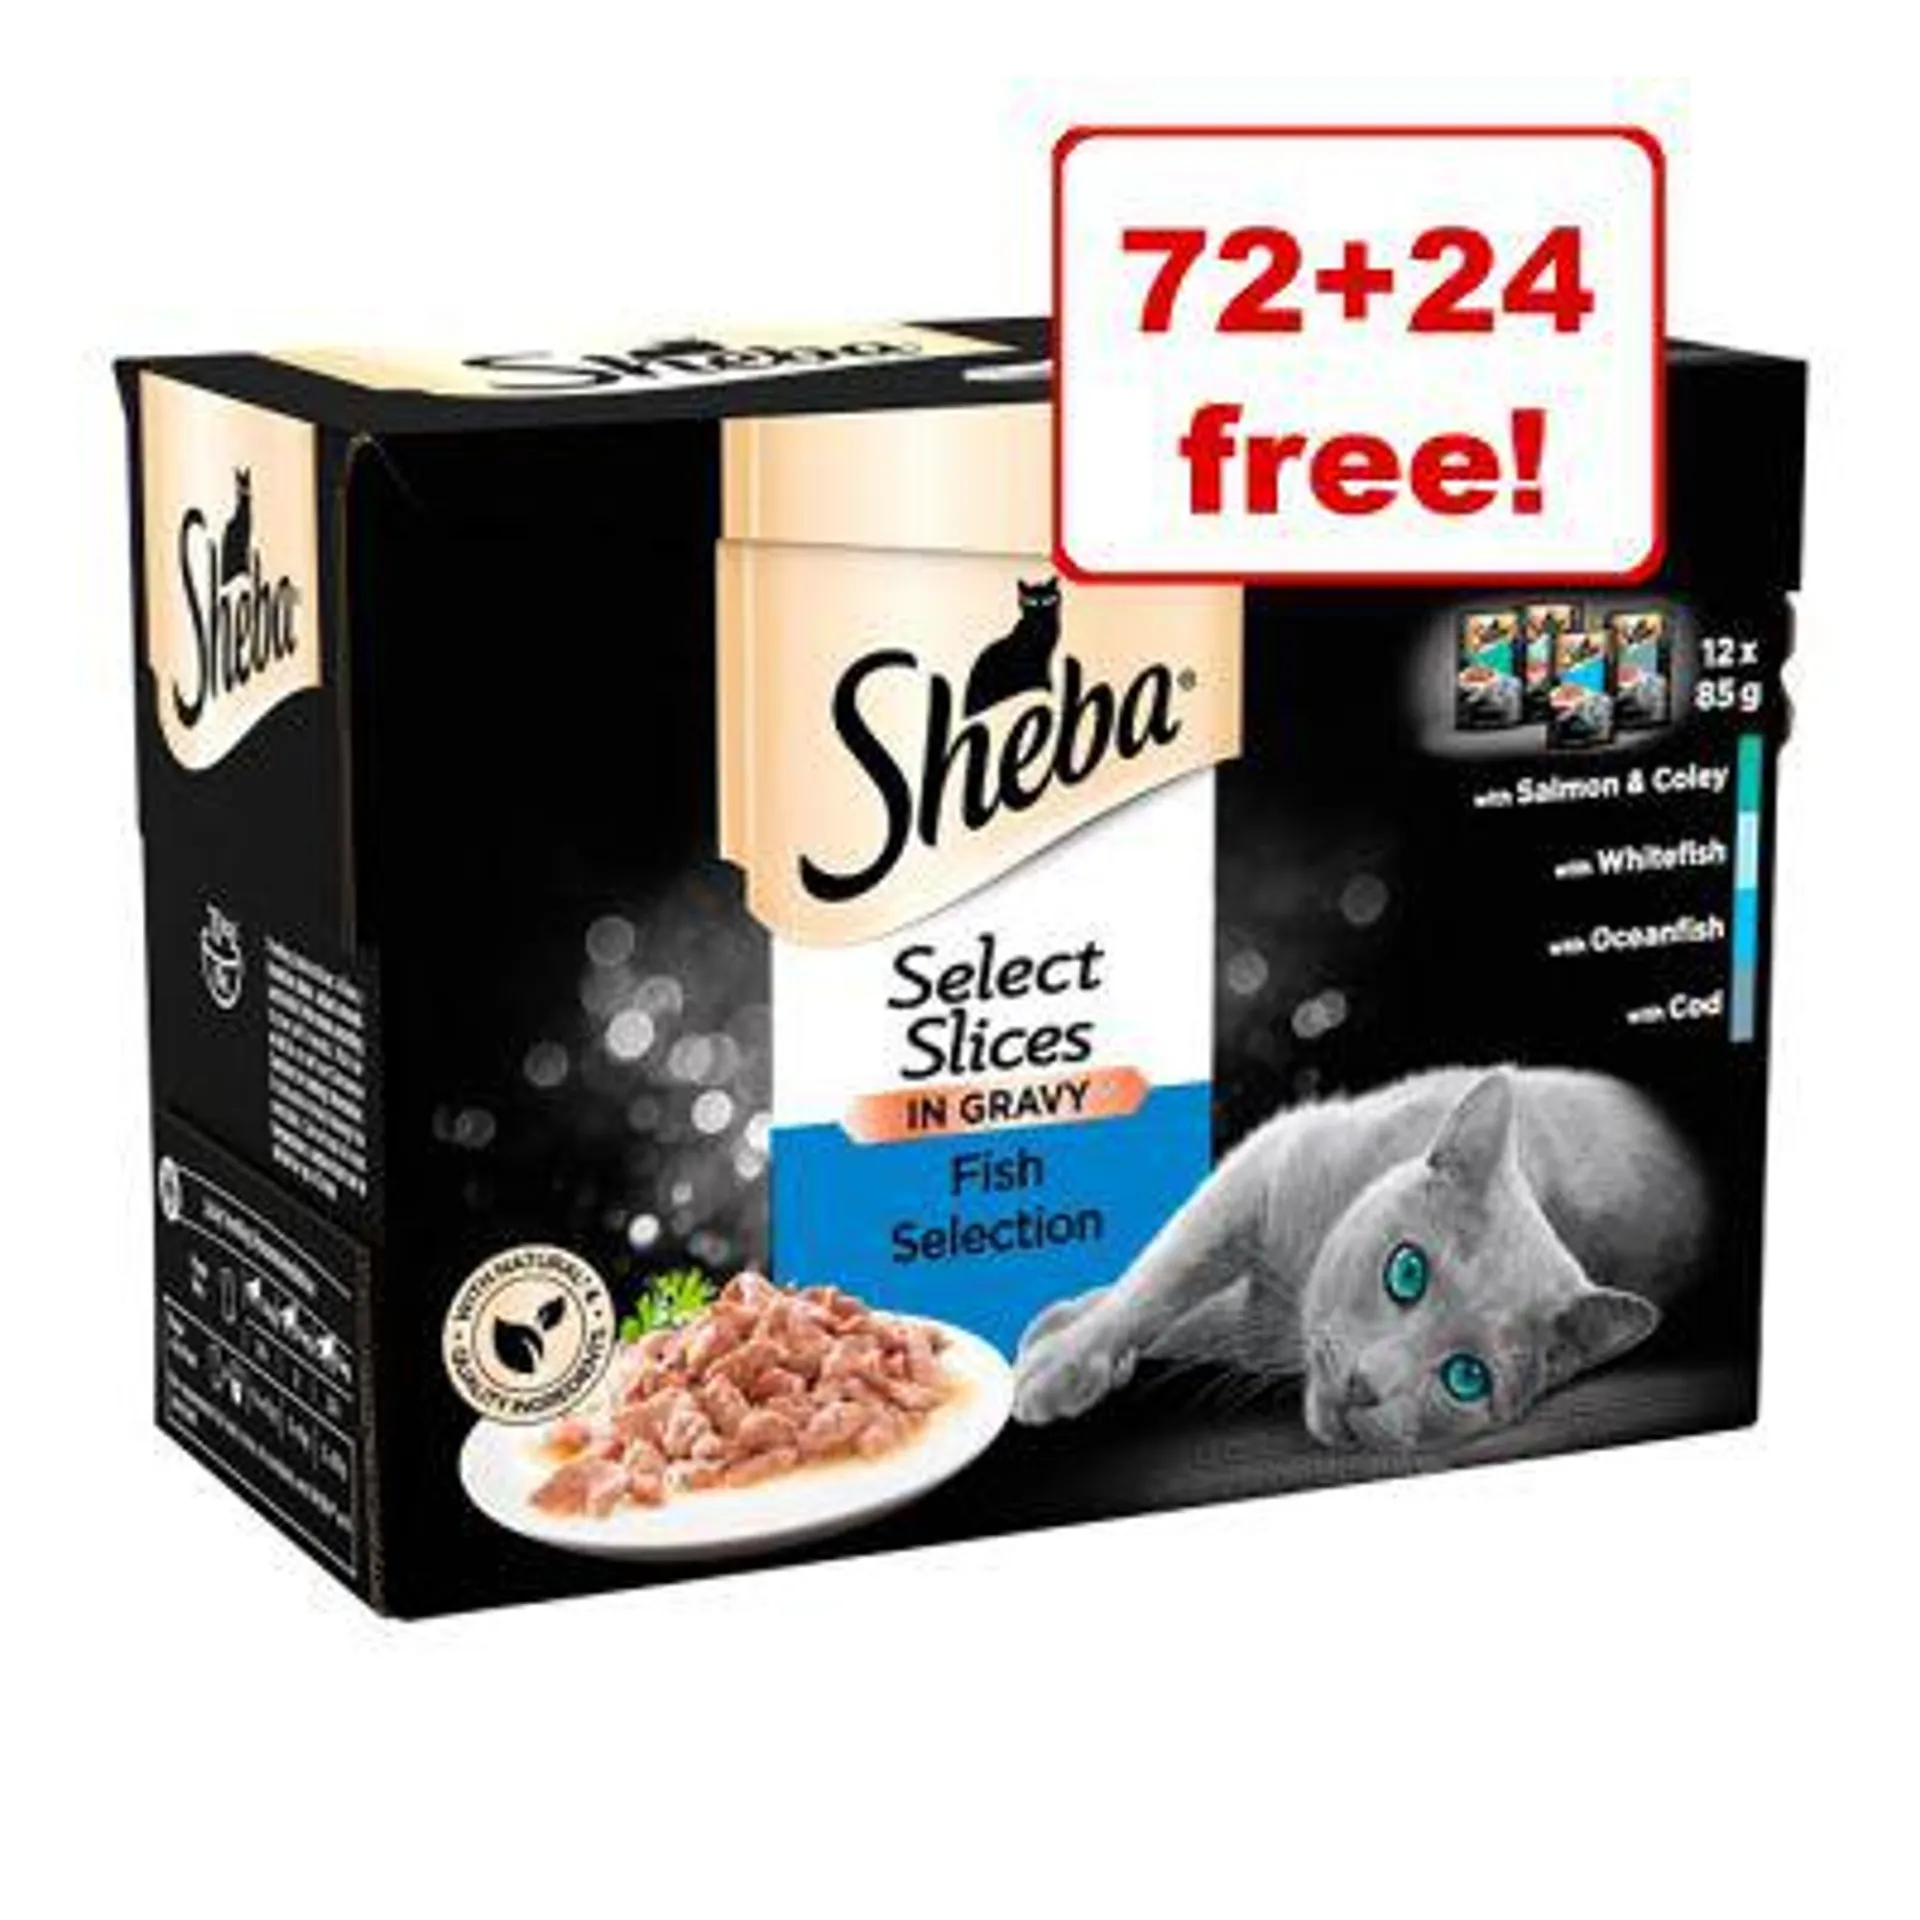 96 x 85g Sheba Pouches Wet Cat Food - 72 + 24 Free!*